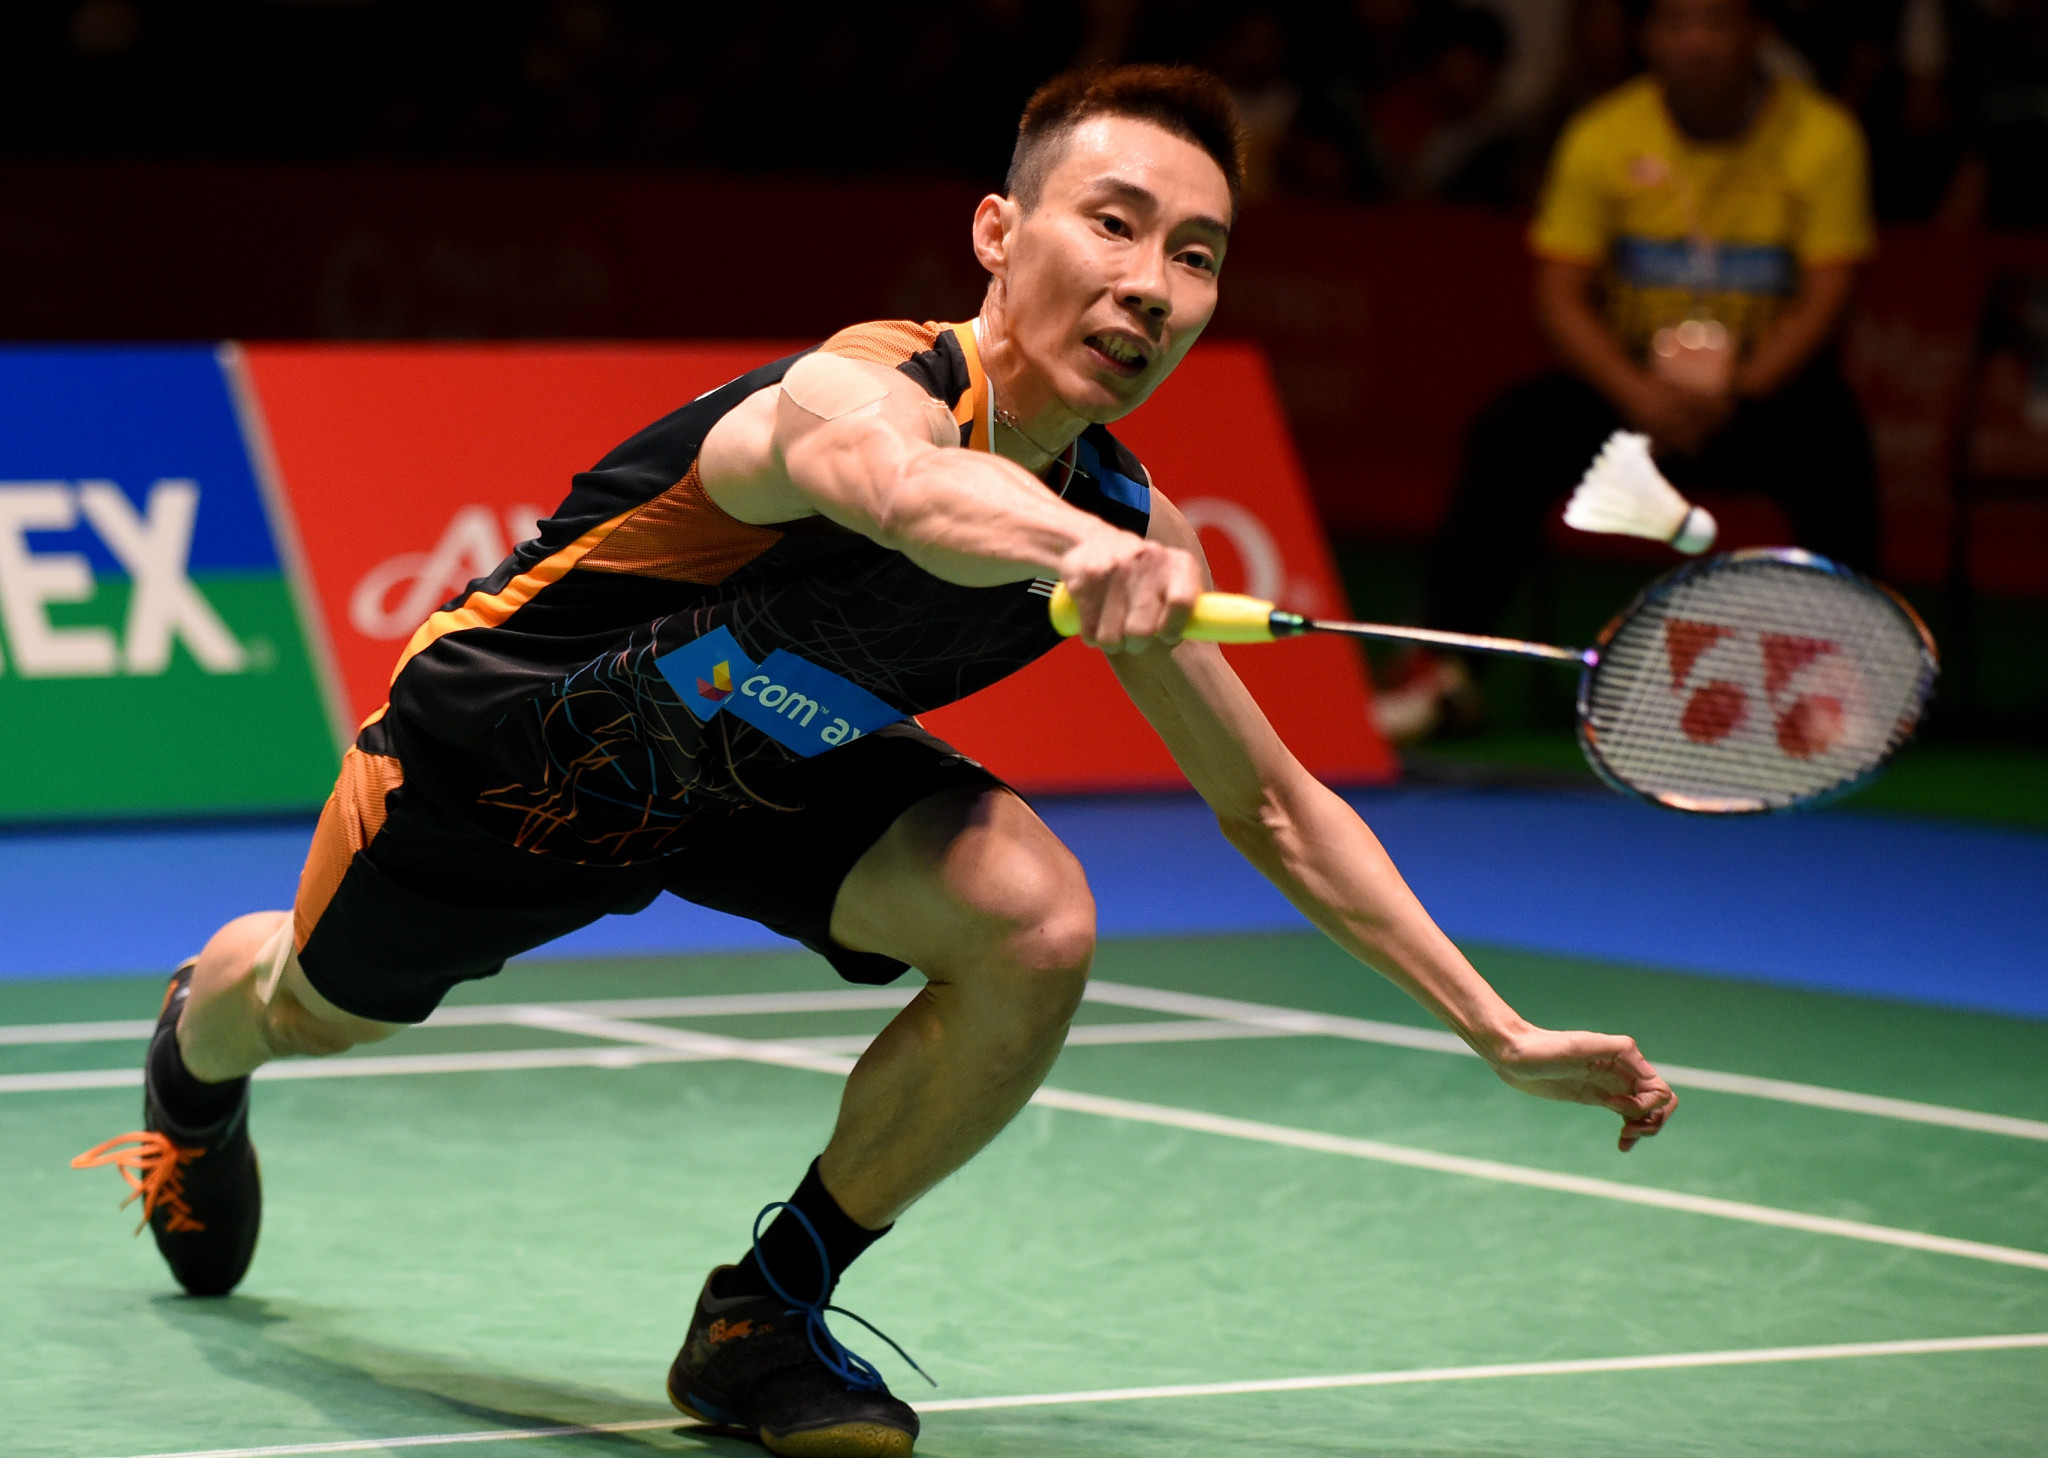 Lee to let Badminton Association of Malaysia decide on his participation at Gold Coast 2018